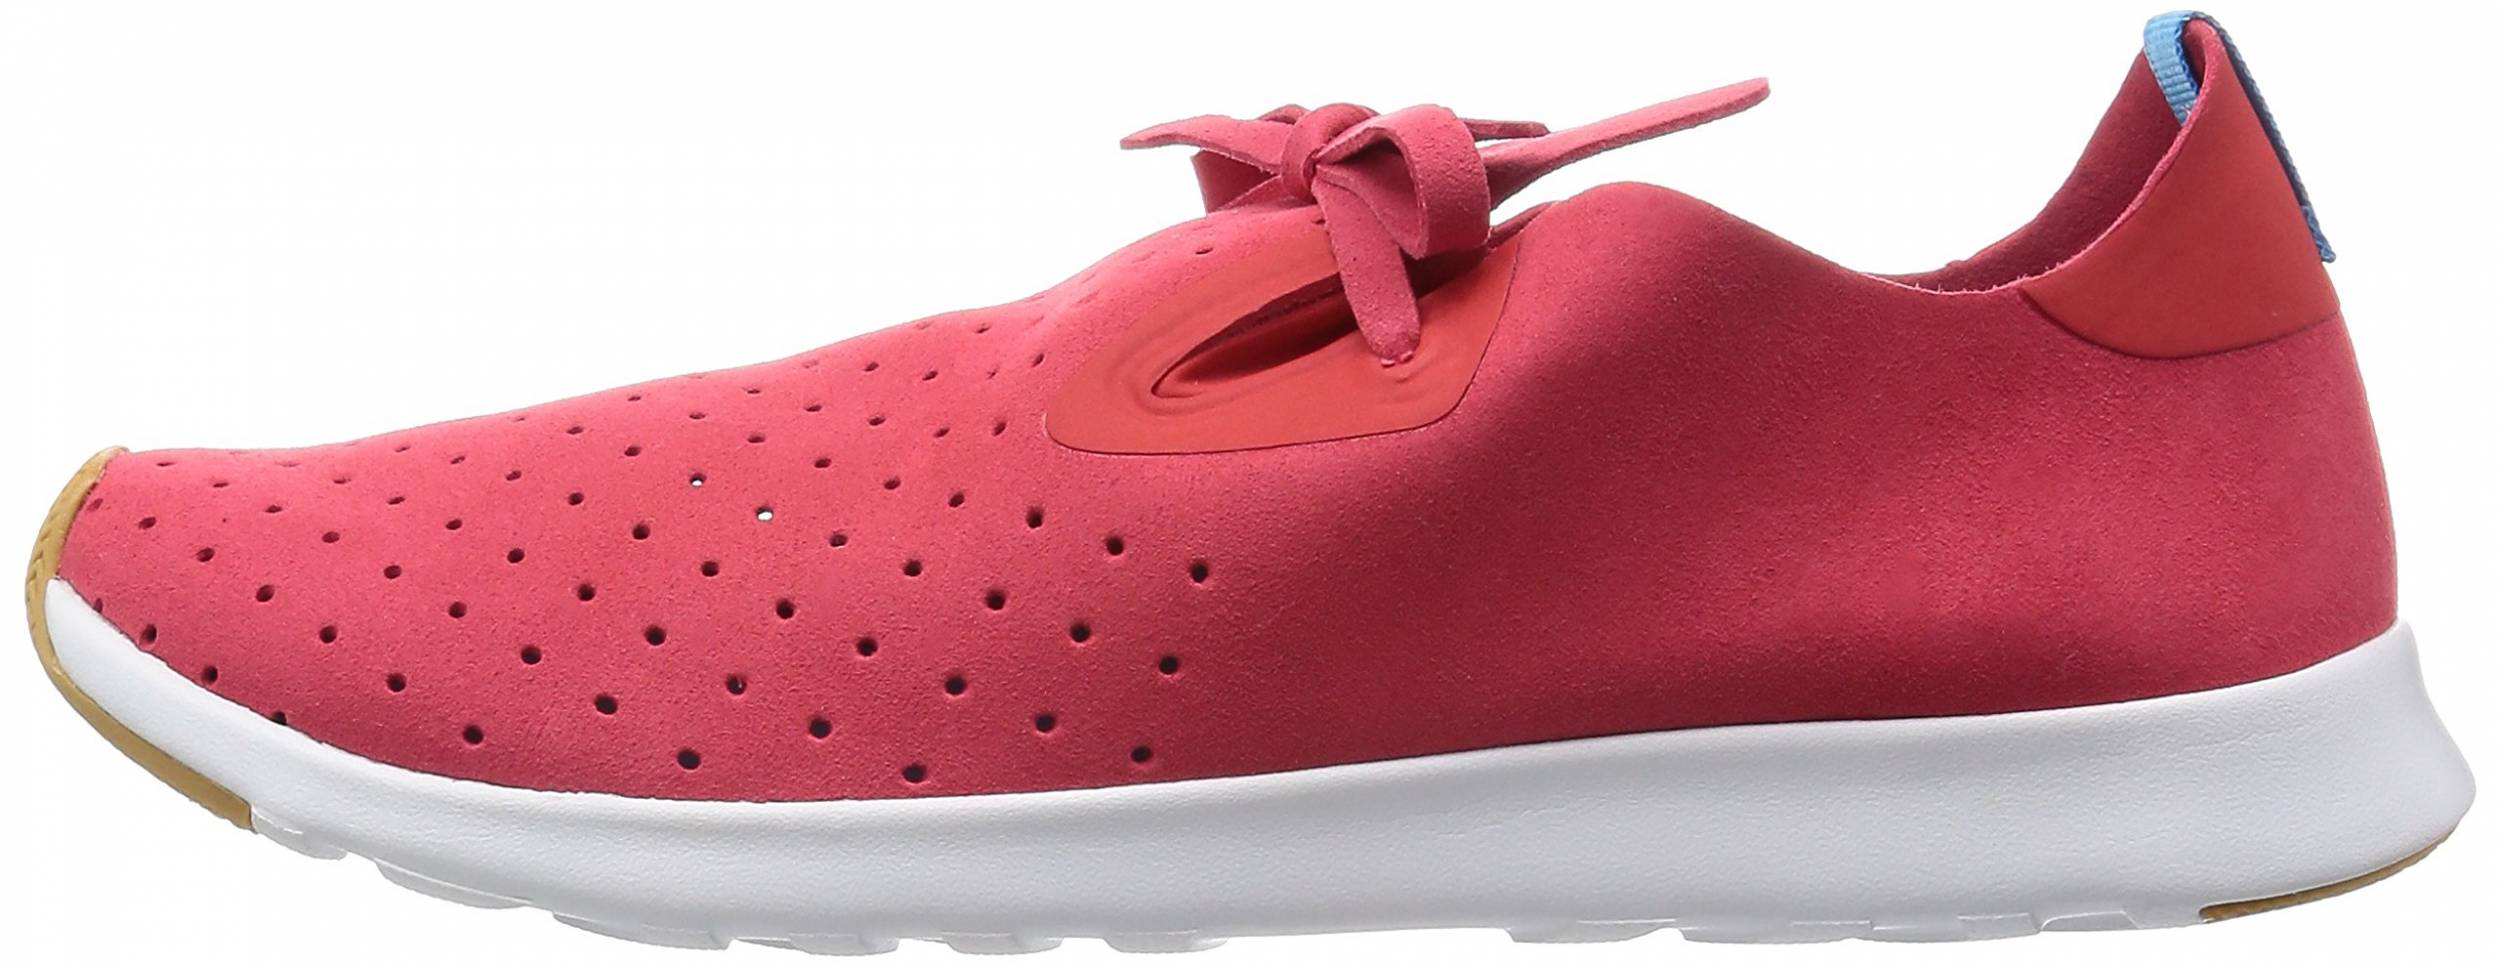 Native Apollo Moc sneakers in 9 colors (only $50) | RunRepeat